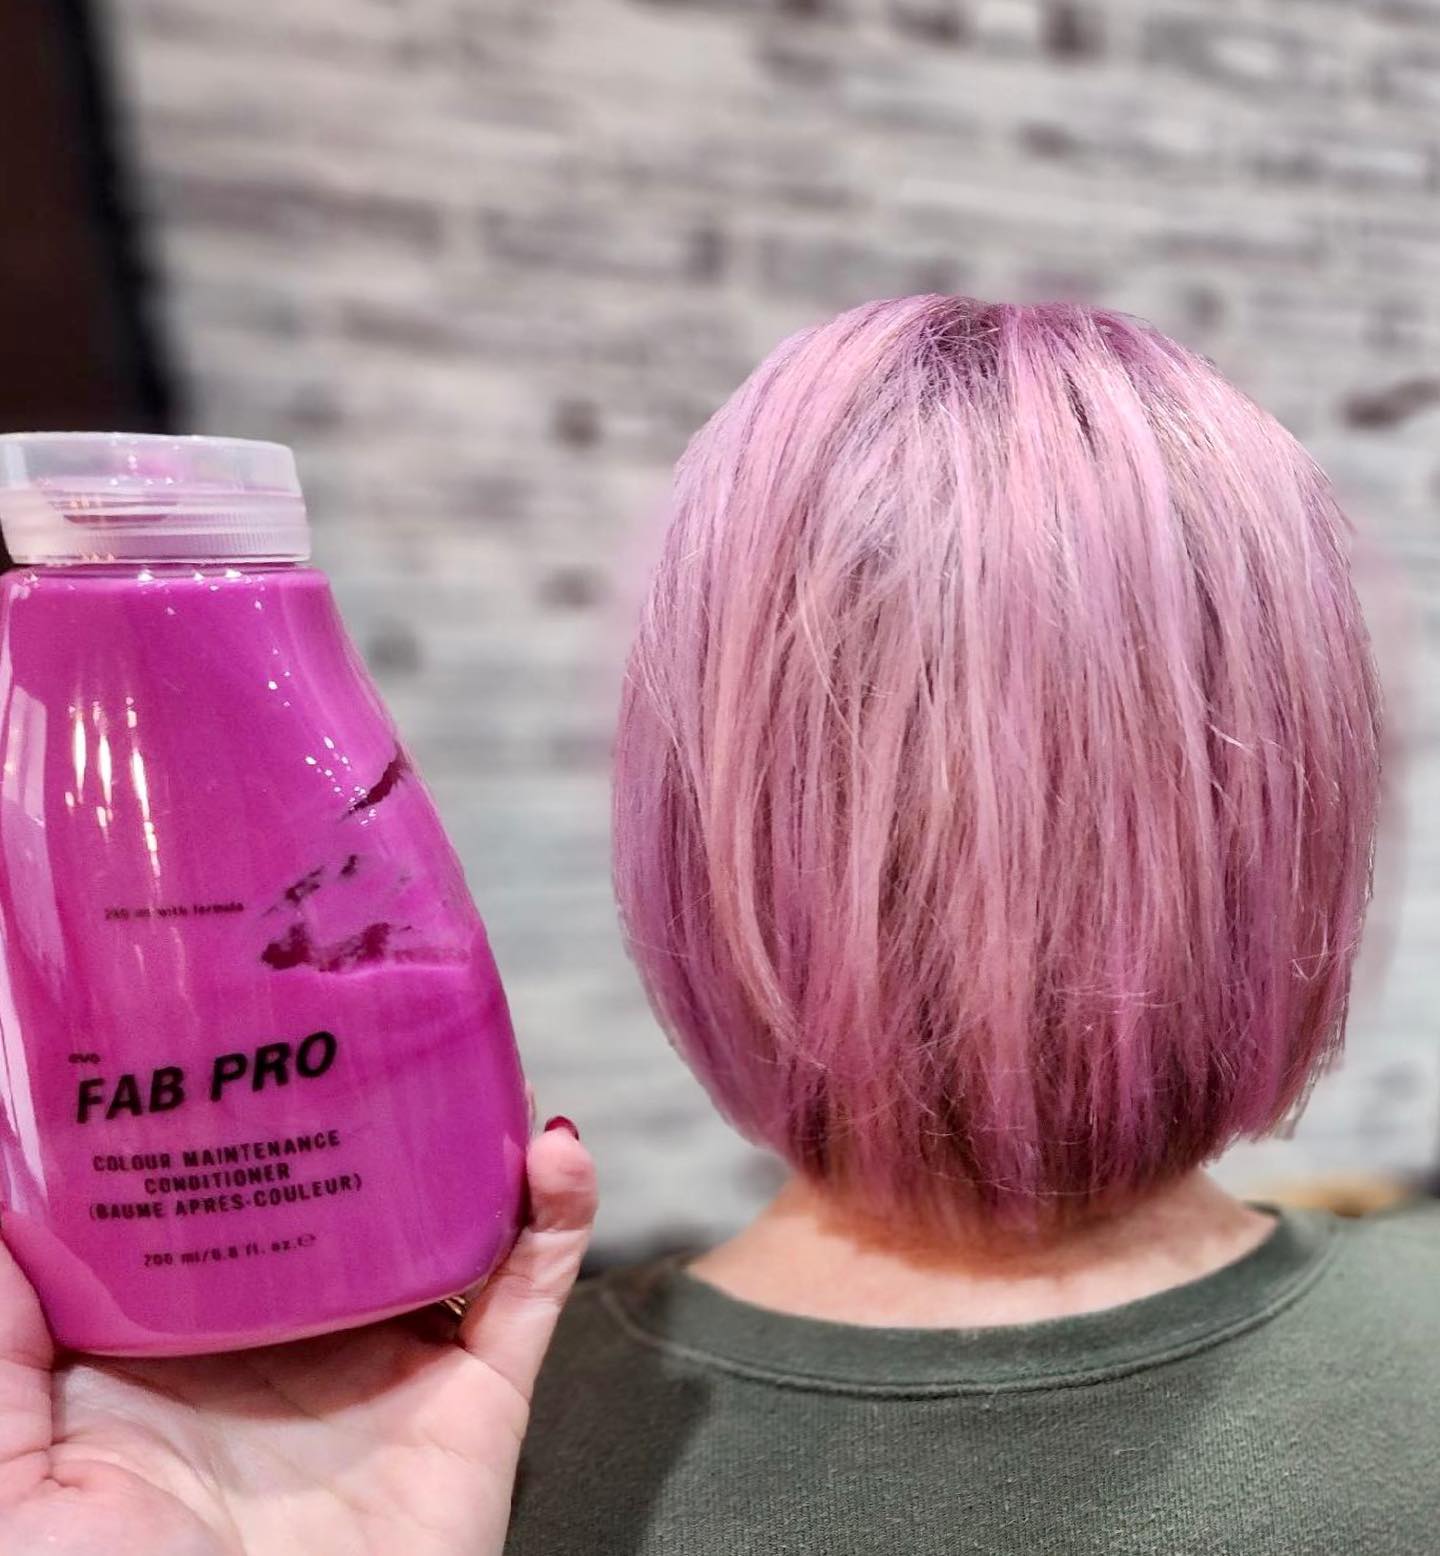 Go P I N K stay P I N K We are loving This CUSTOM color maintenance conditioner from @evohair to keep your color fresh between services! -hair by @shearsara